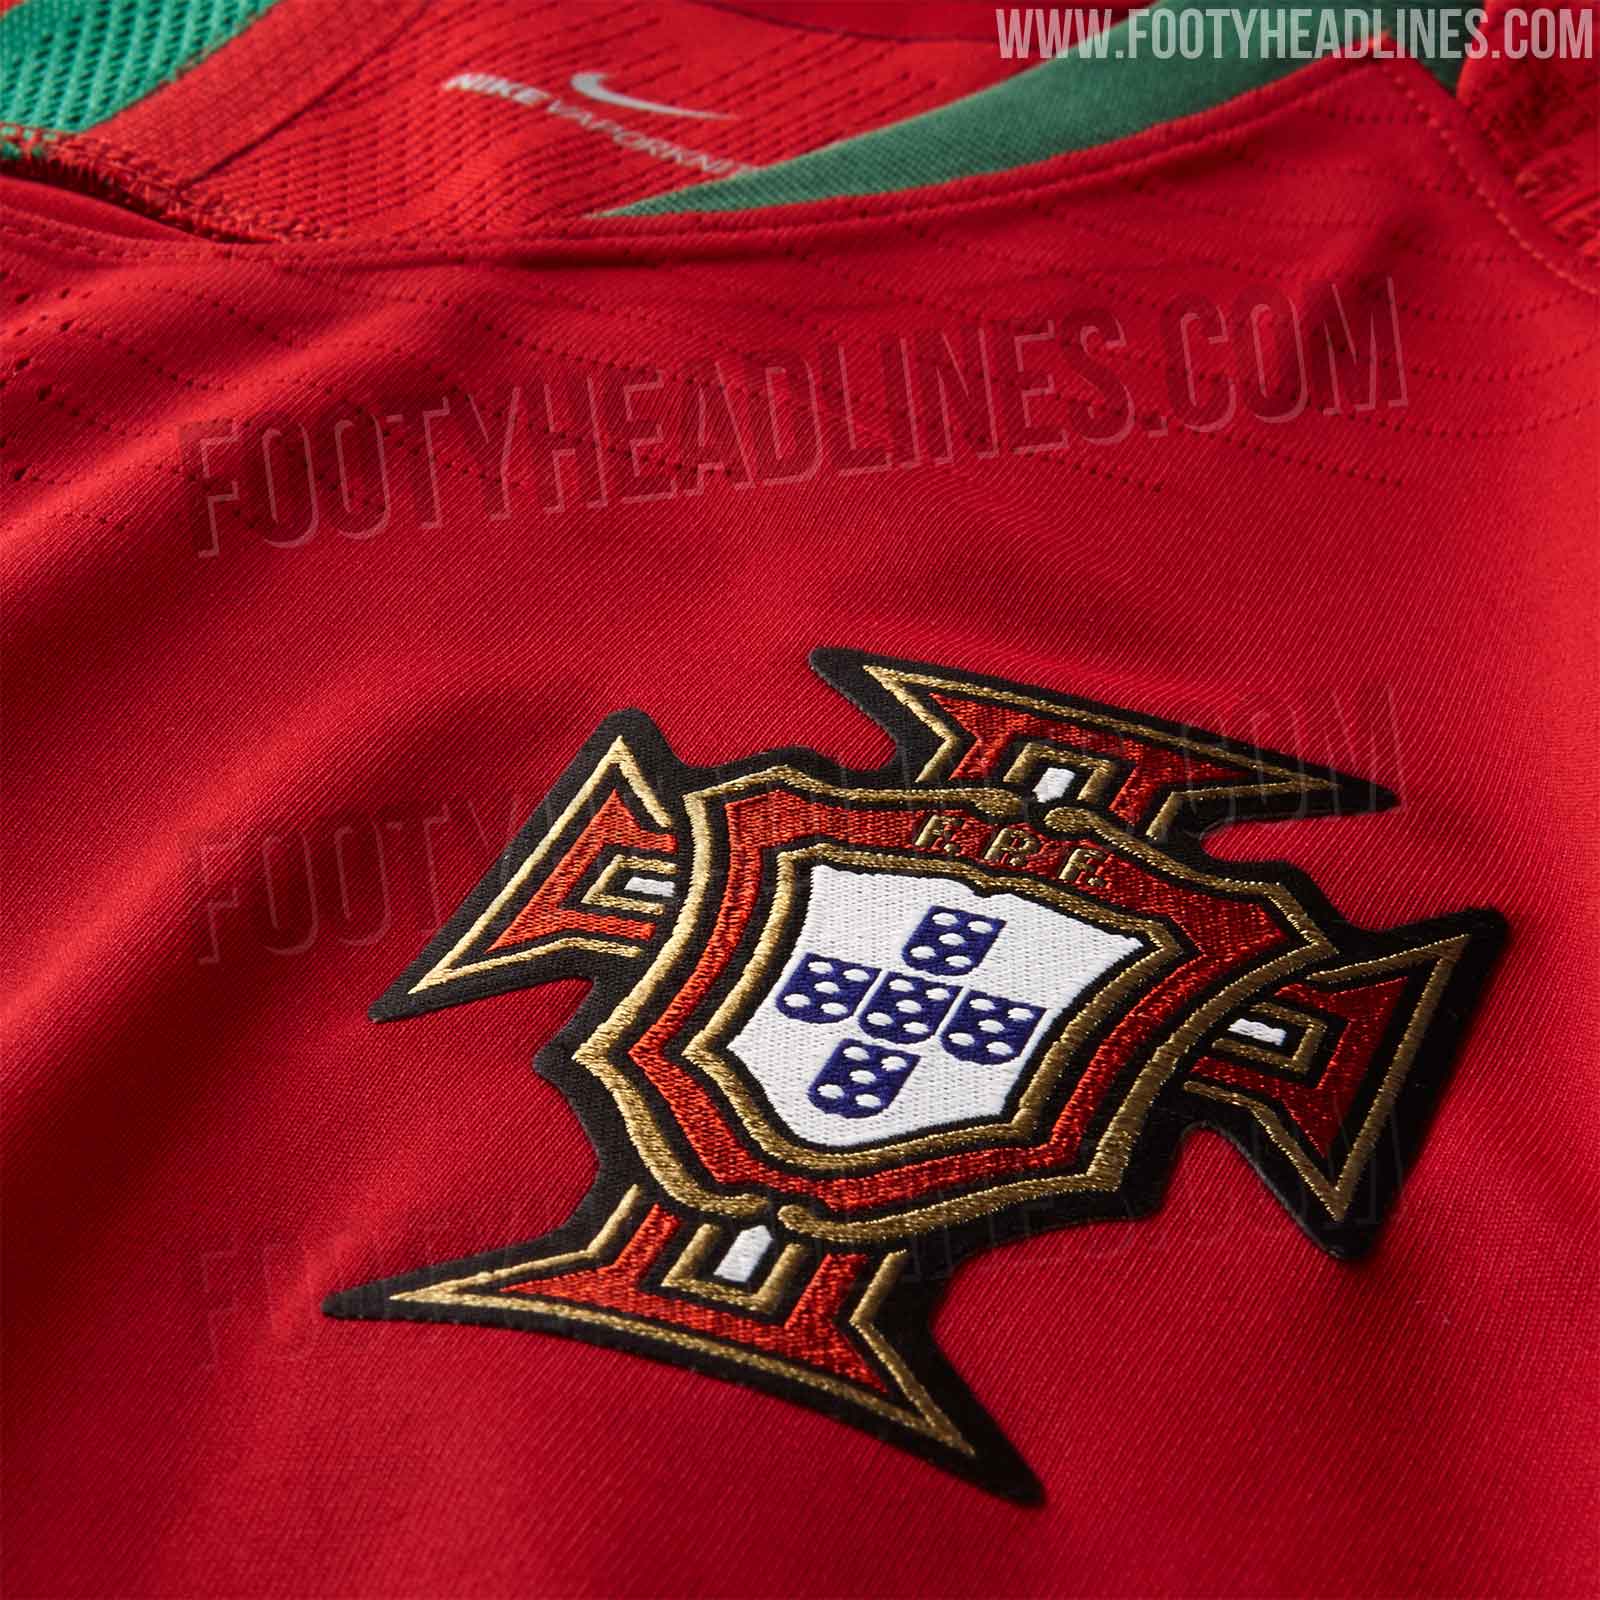 Portugal 2018 World Cup Home Kit Released - Footy Headlines